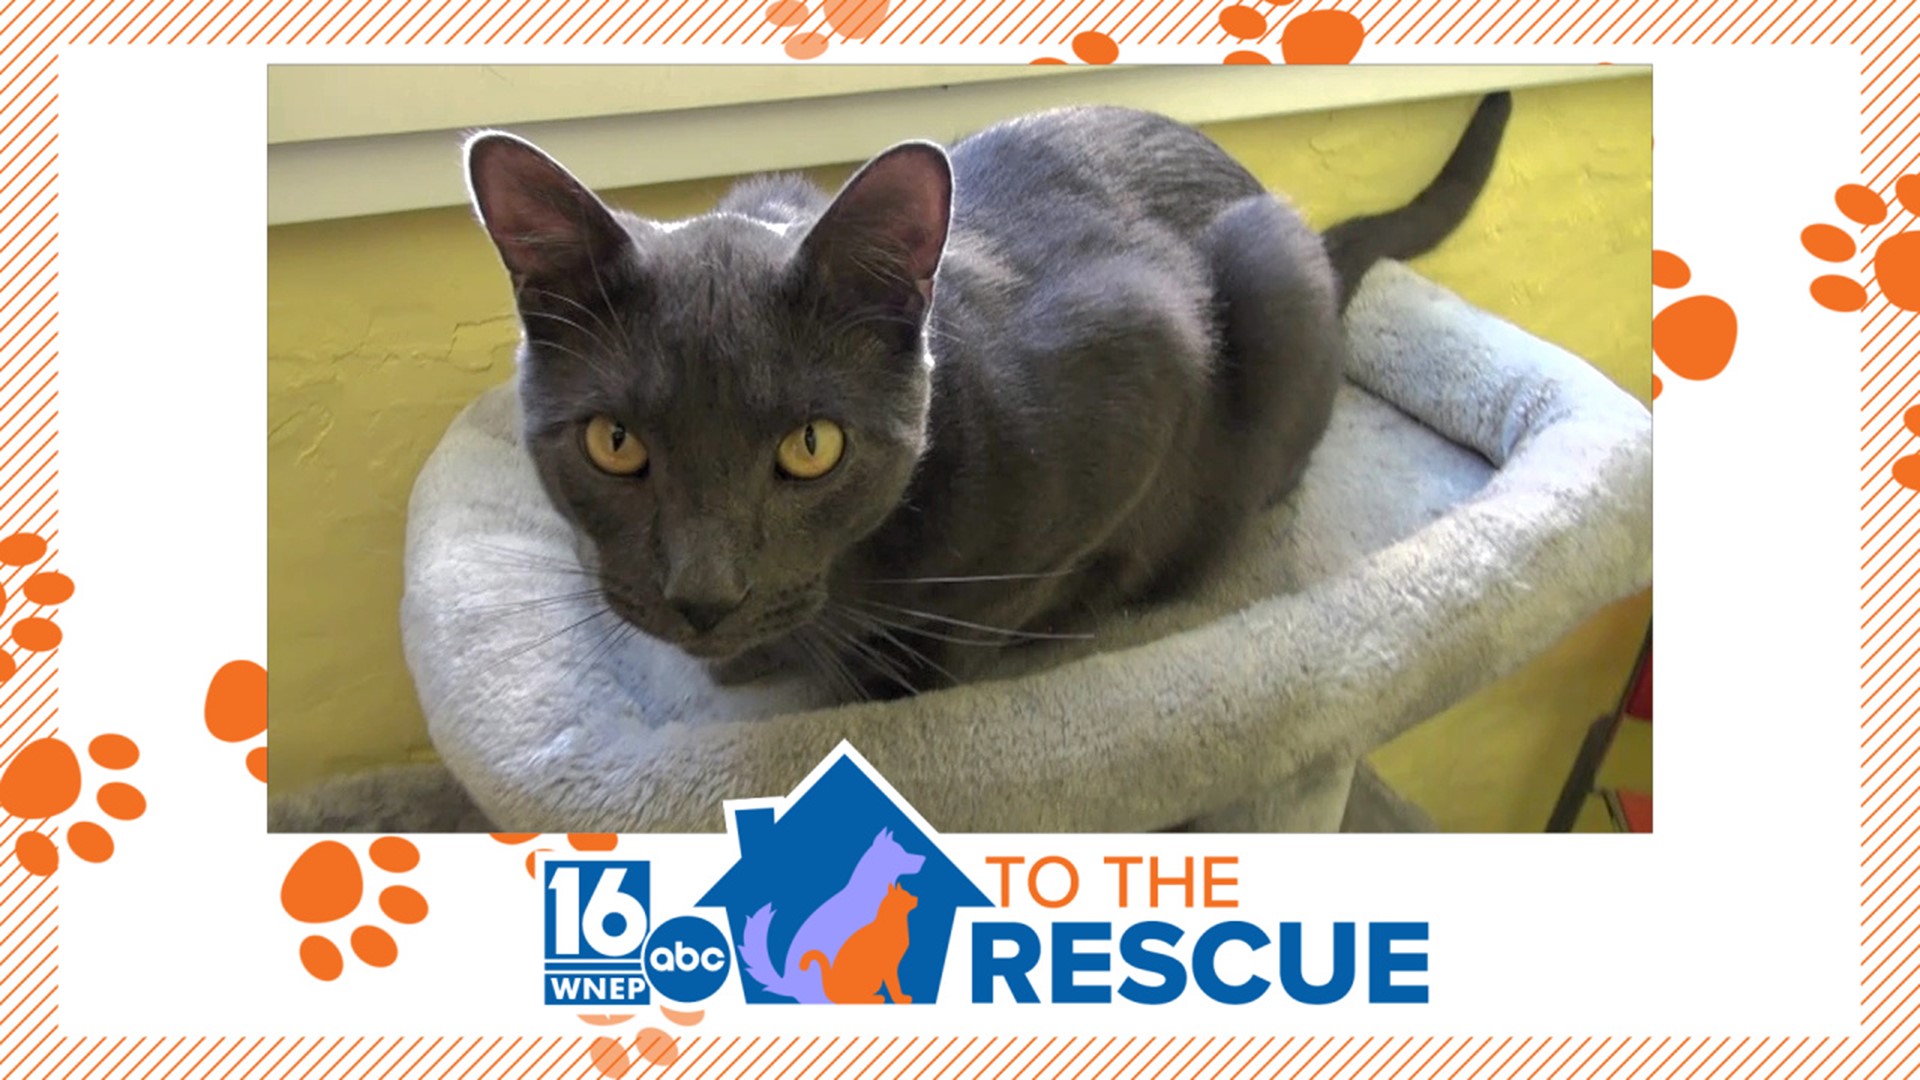 In this week's 16 To The Rescue, we meet a high-energy cat named after a trickster who needs a patient family willing to give a third chance and a forever home.